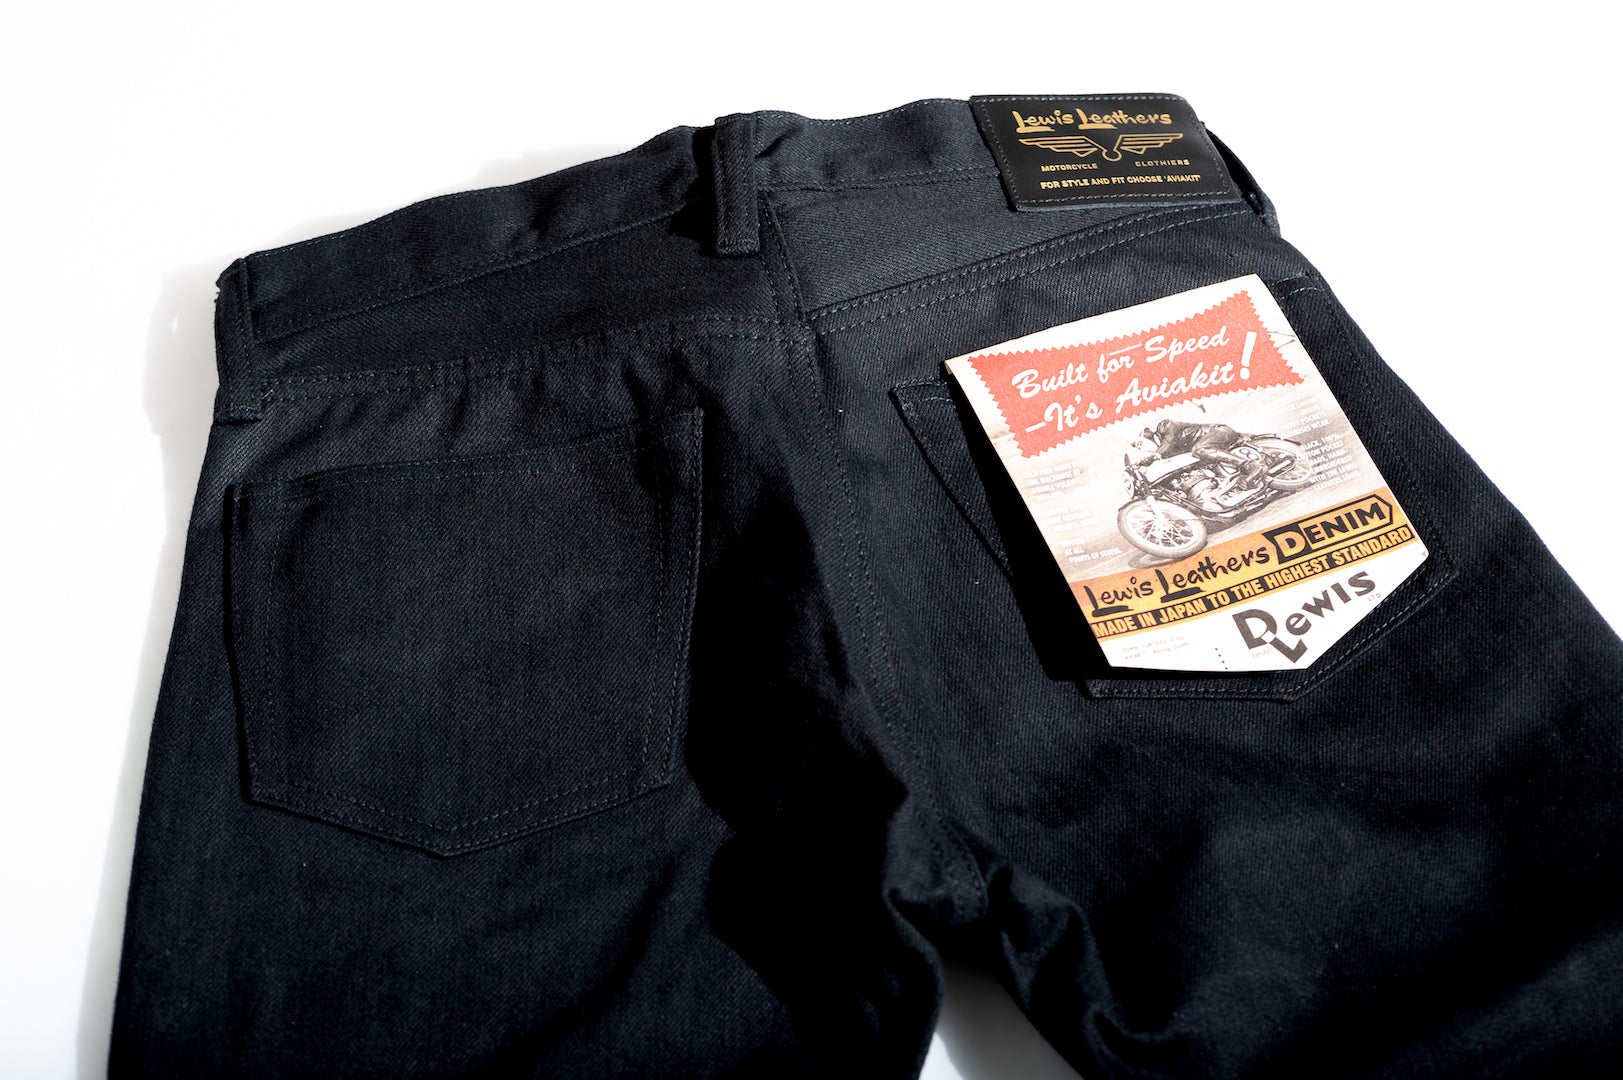 Lewis Leathers 15oz Black Denim (Relaxed Tapered Fit)